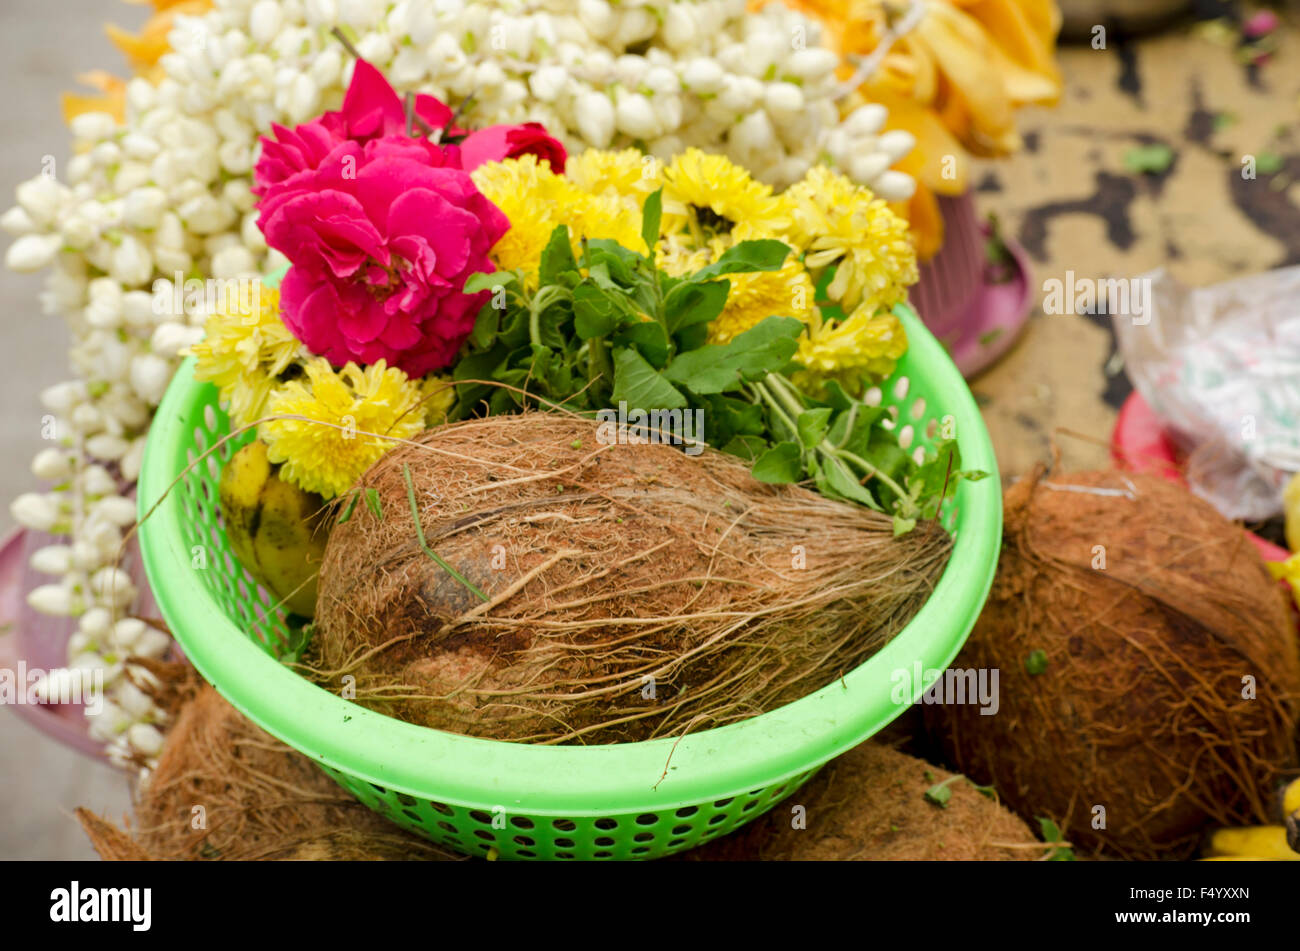 Offerings for a prayer in Parthasarathy temple, Chennai, Tamil Nadu, India, Asia Stock Photo